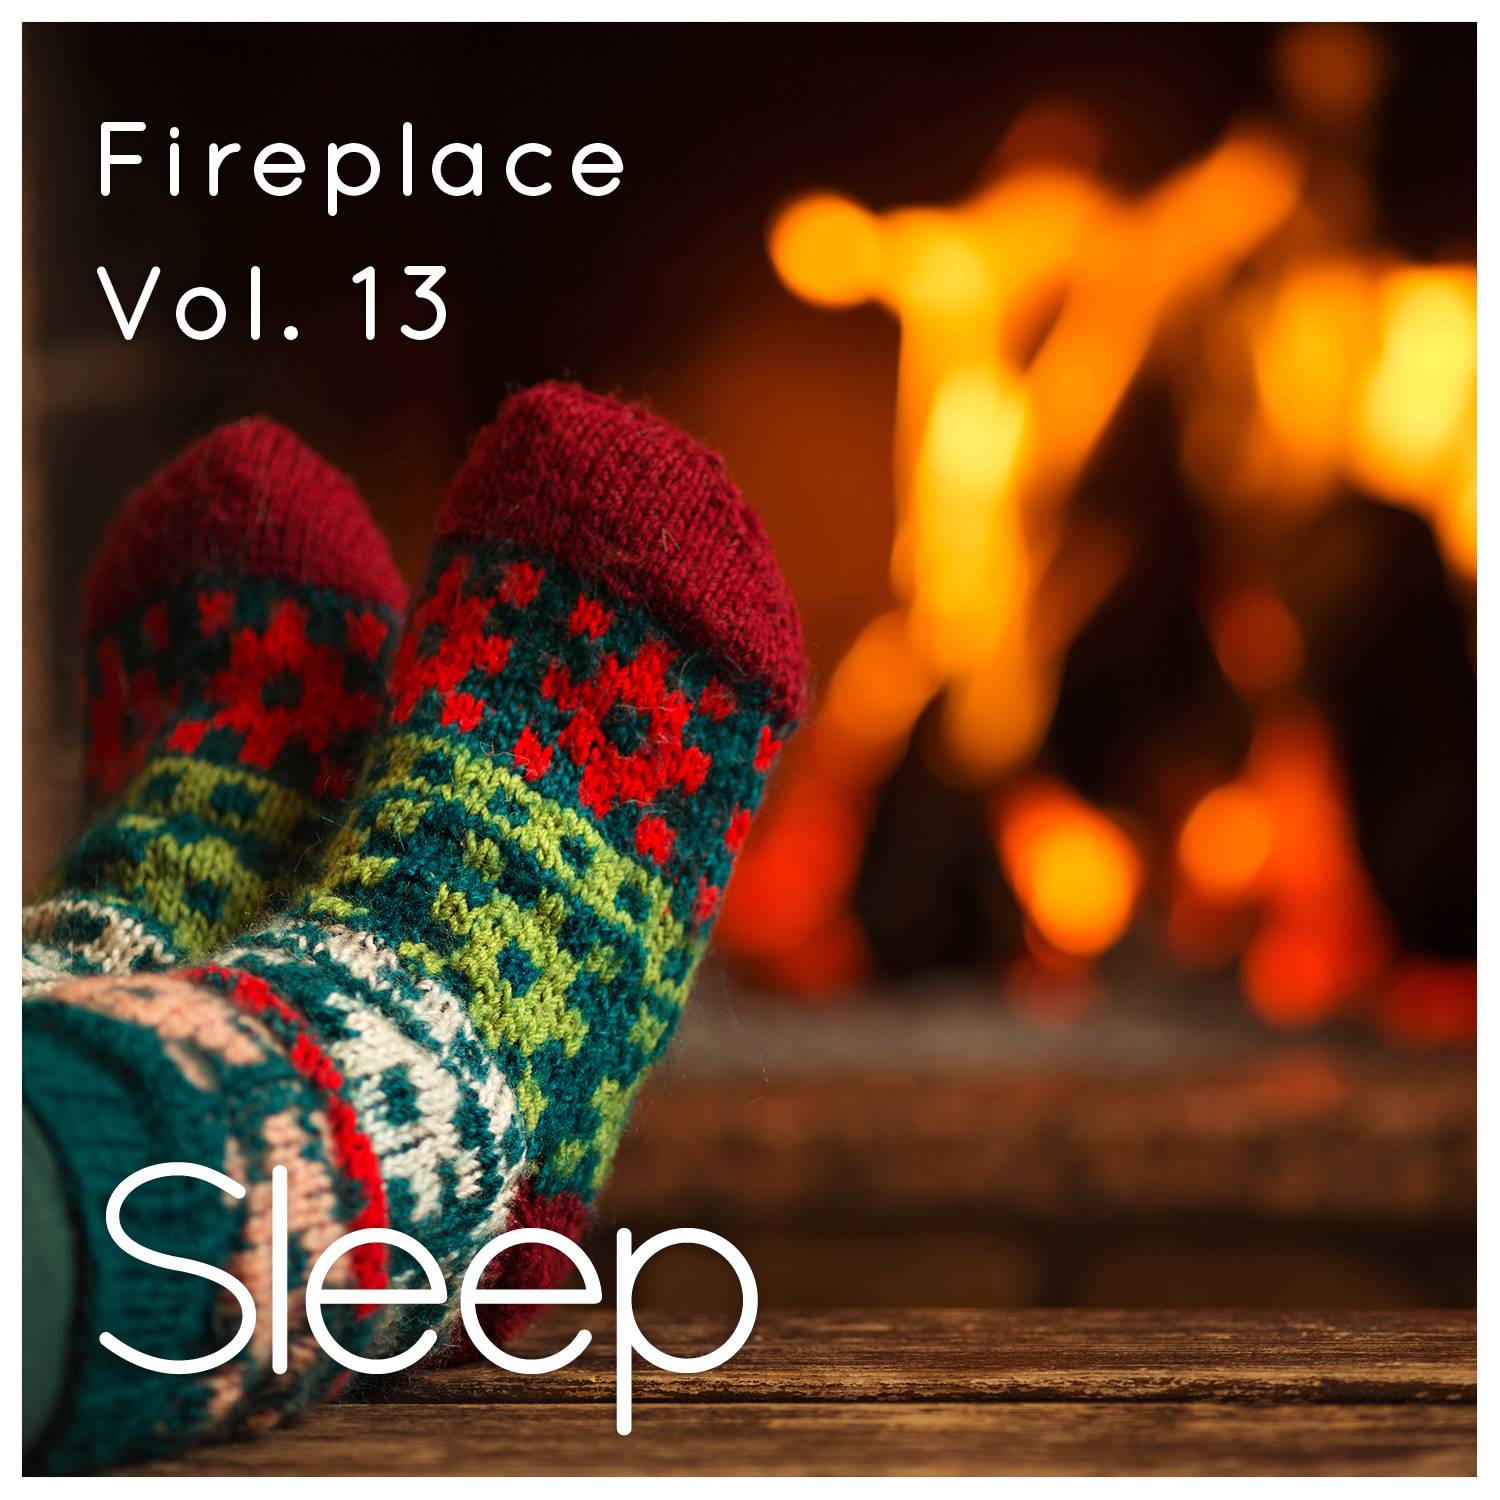 Burning Fireplace with Crackling Fire Sounds, Pt. 61